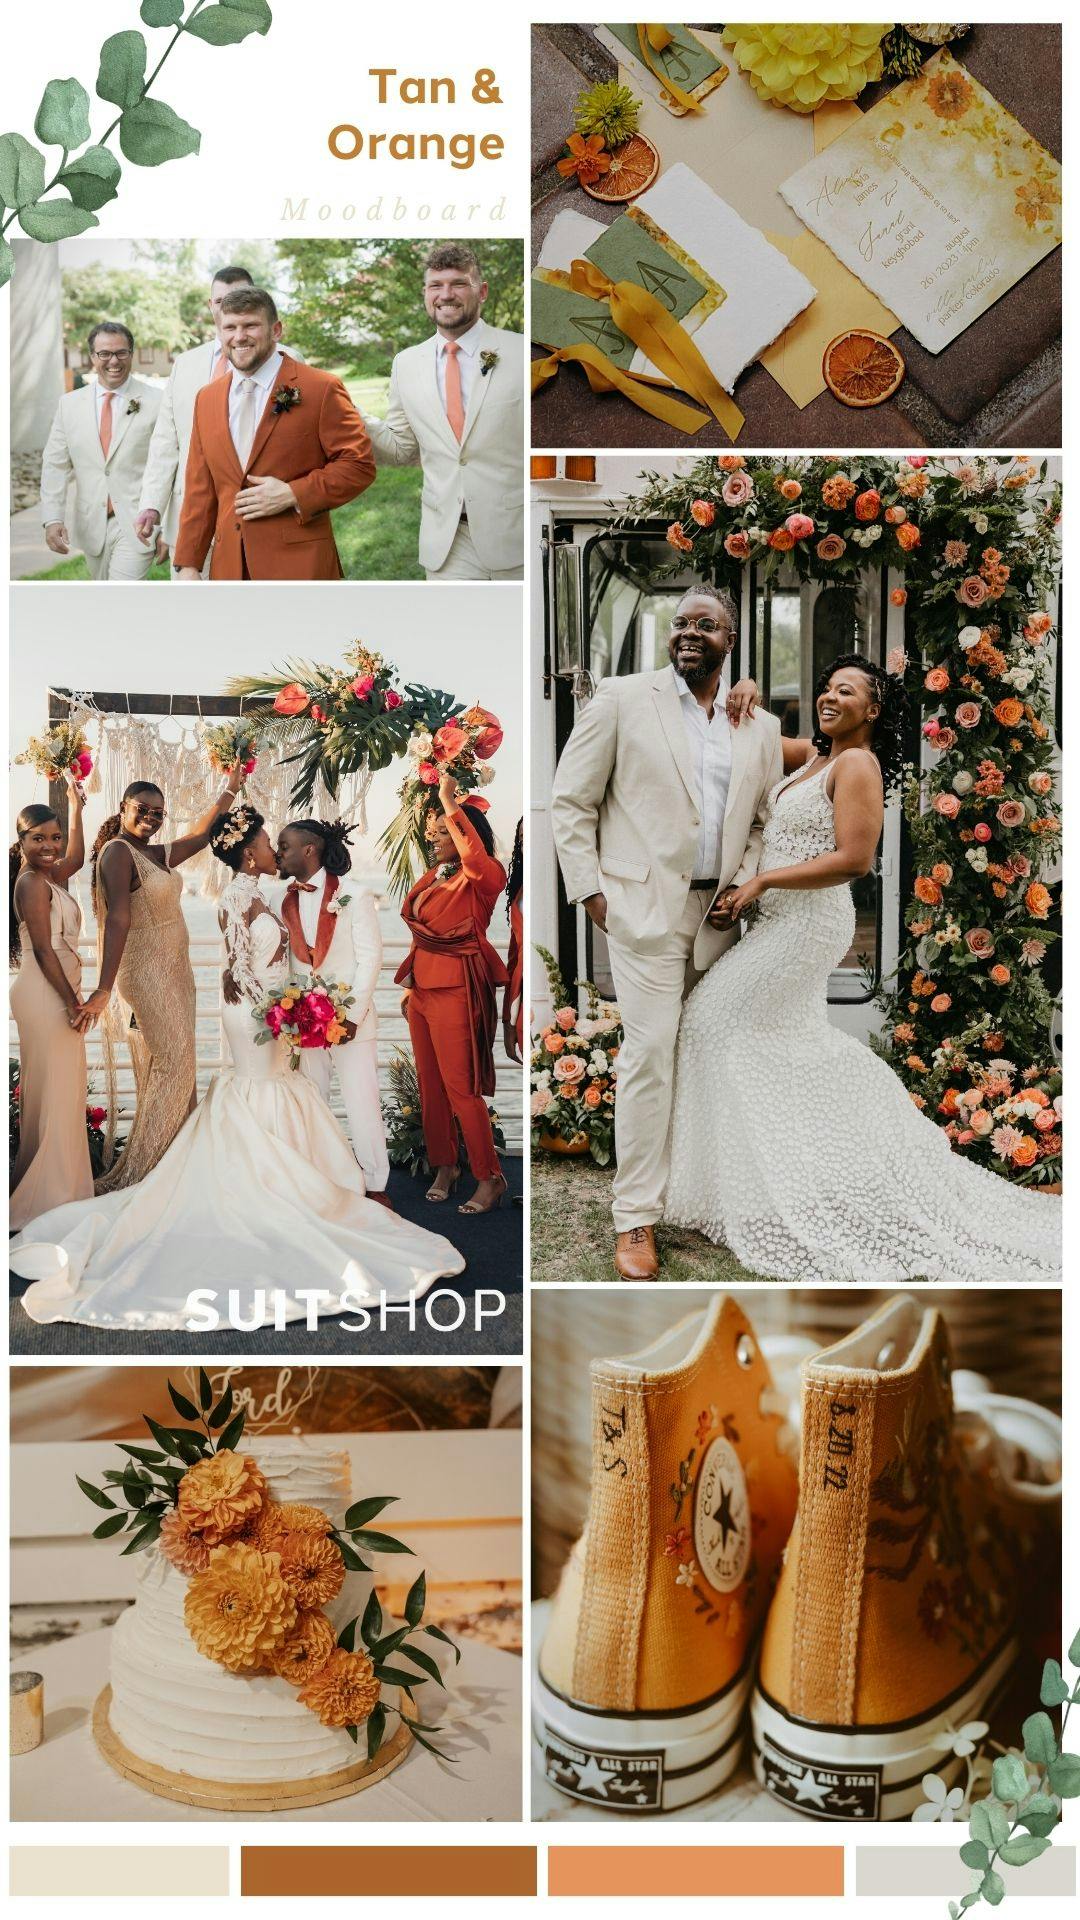 Terra cotta orange and tan rust married wedding color combination with burnt orange suits, apricot florals, and light tan suits and champagne bridesmaid dresses.